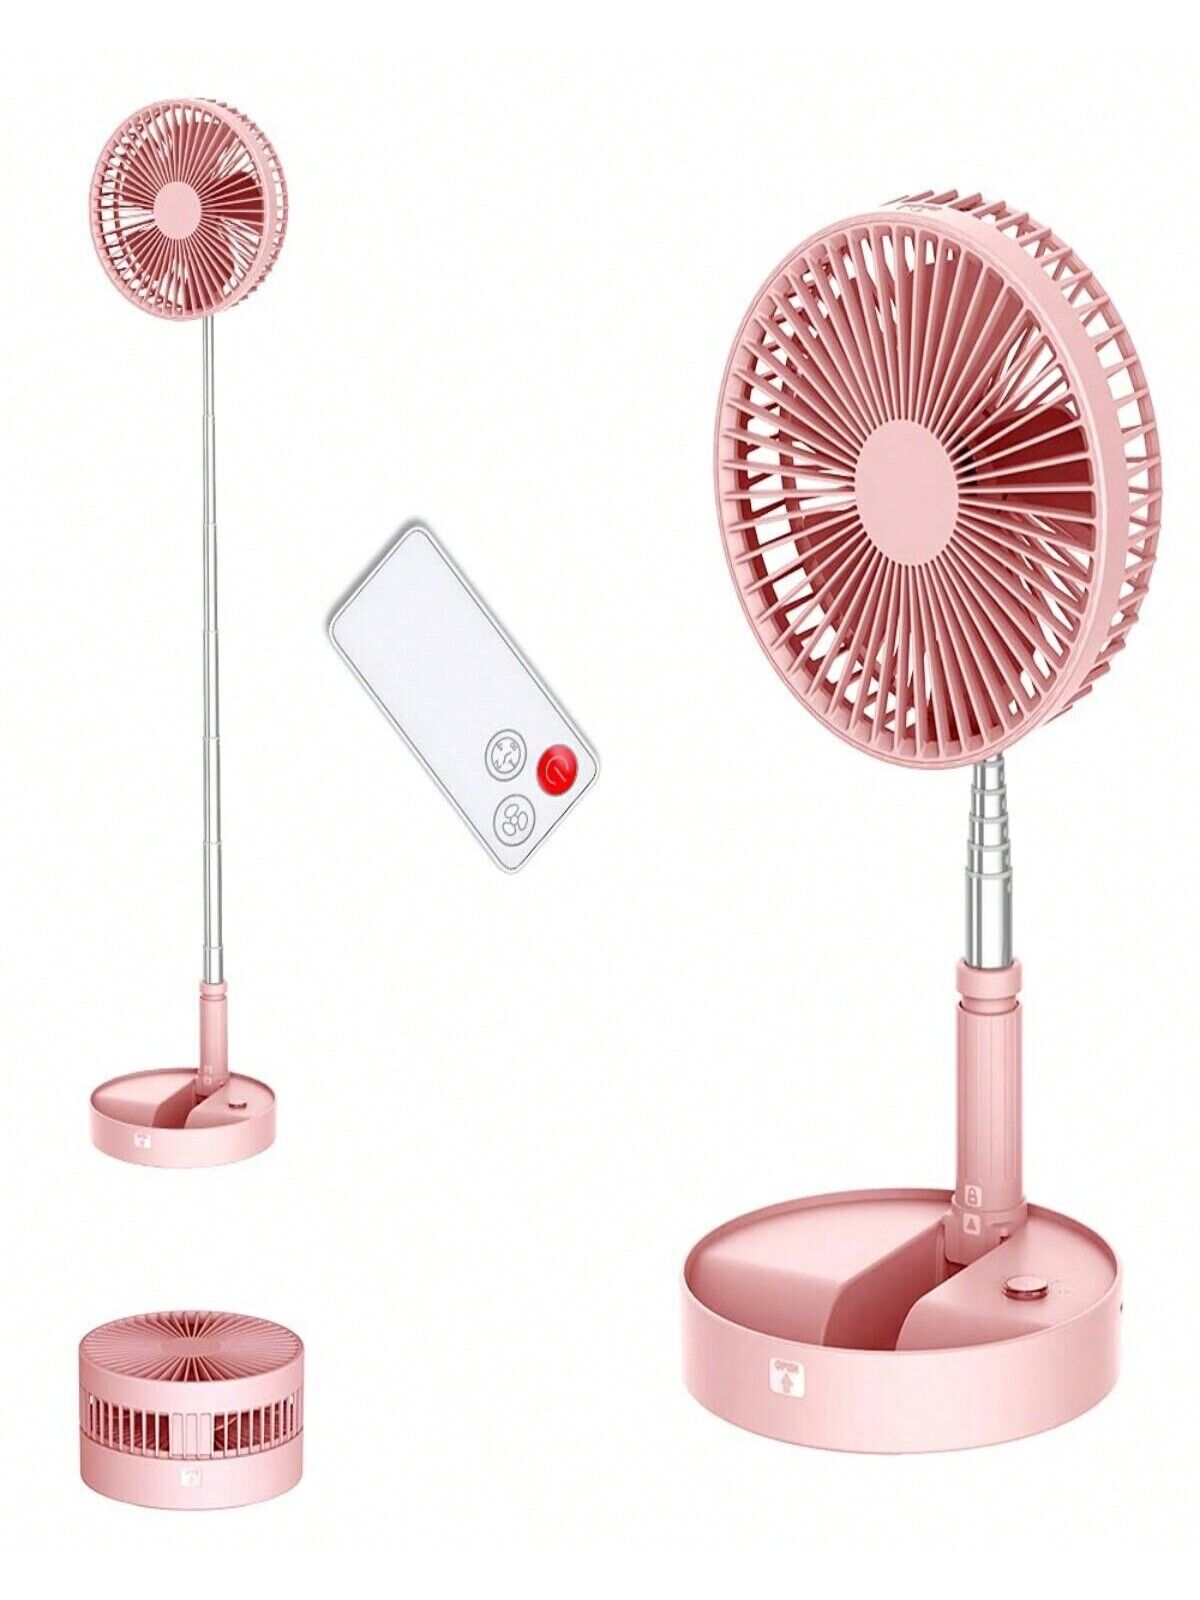 Desk Portable Fan, Fan Remote Control Timer, Battery Operated Or USB Powered